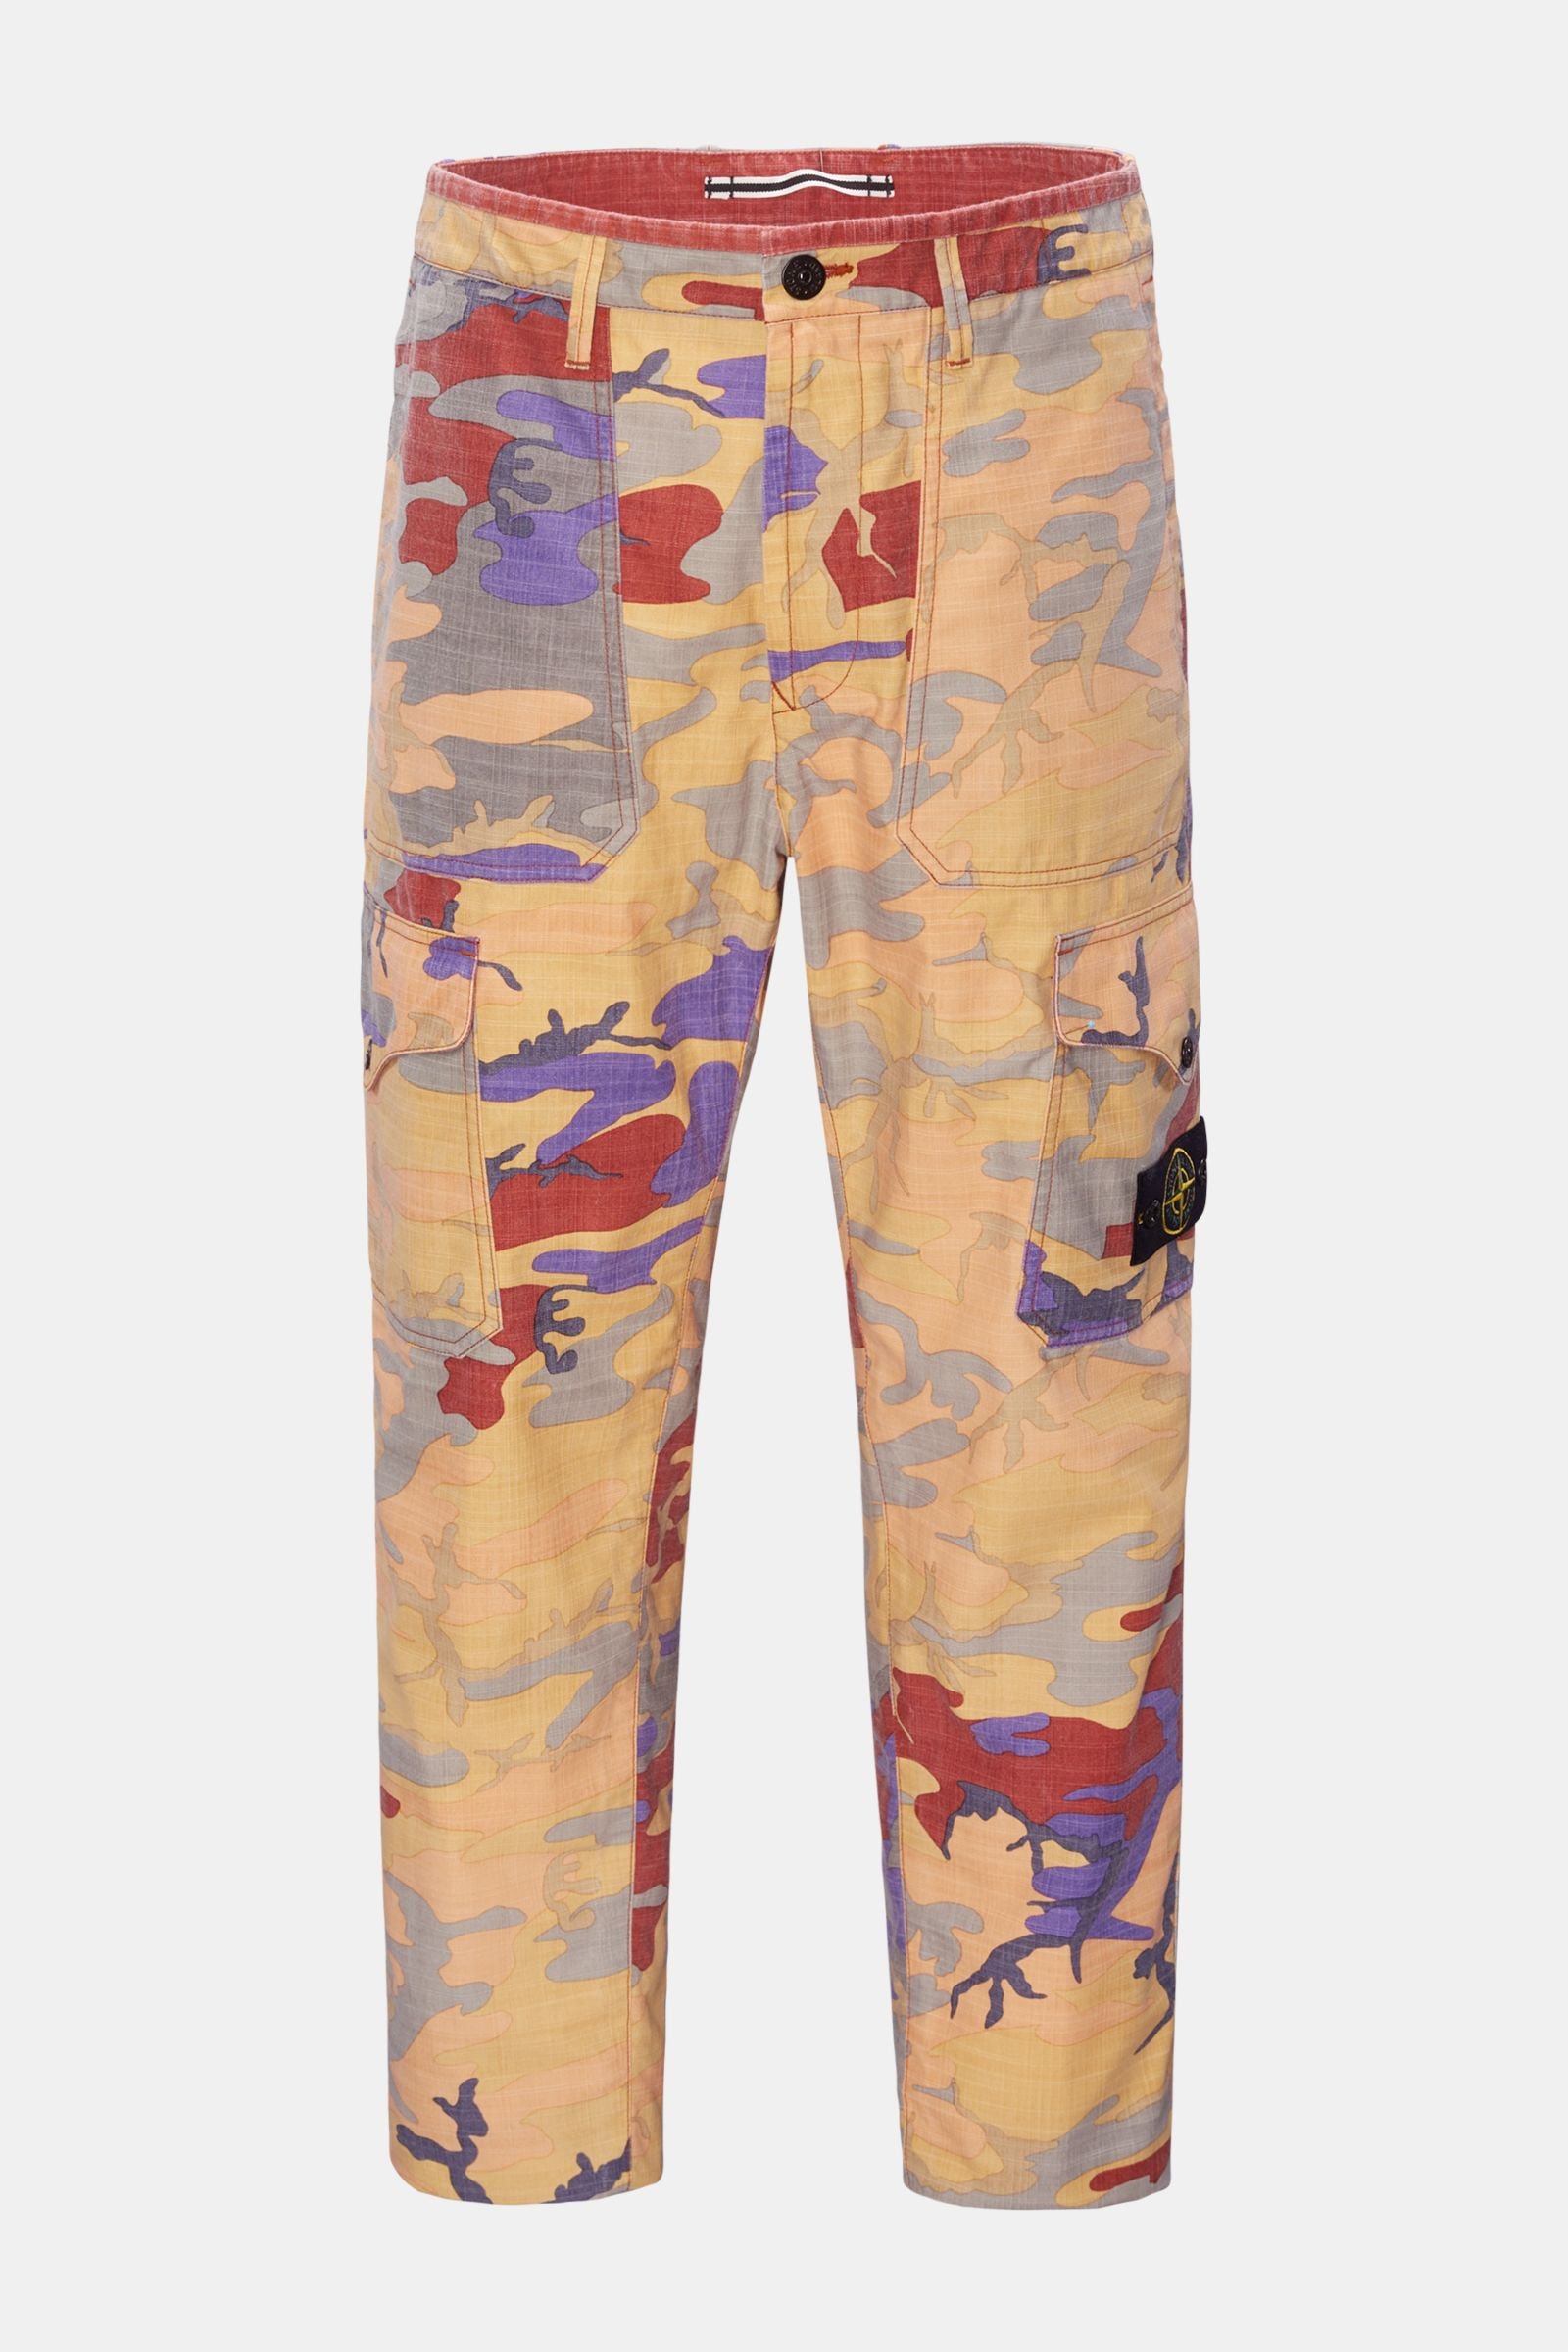 Cargo trousers yellow/rust brown/purple patterned